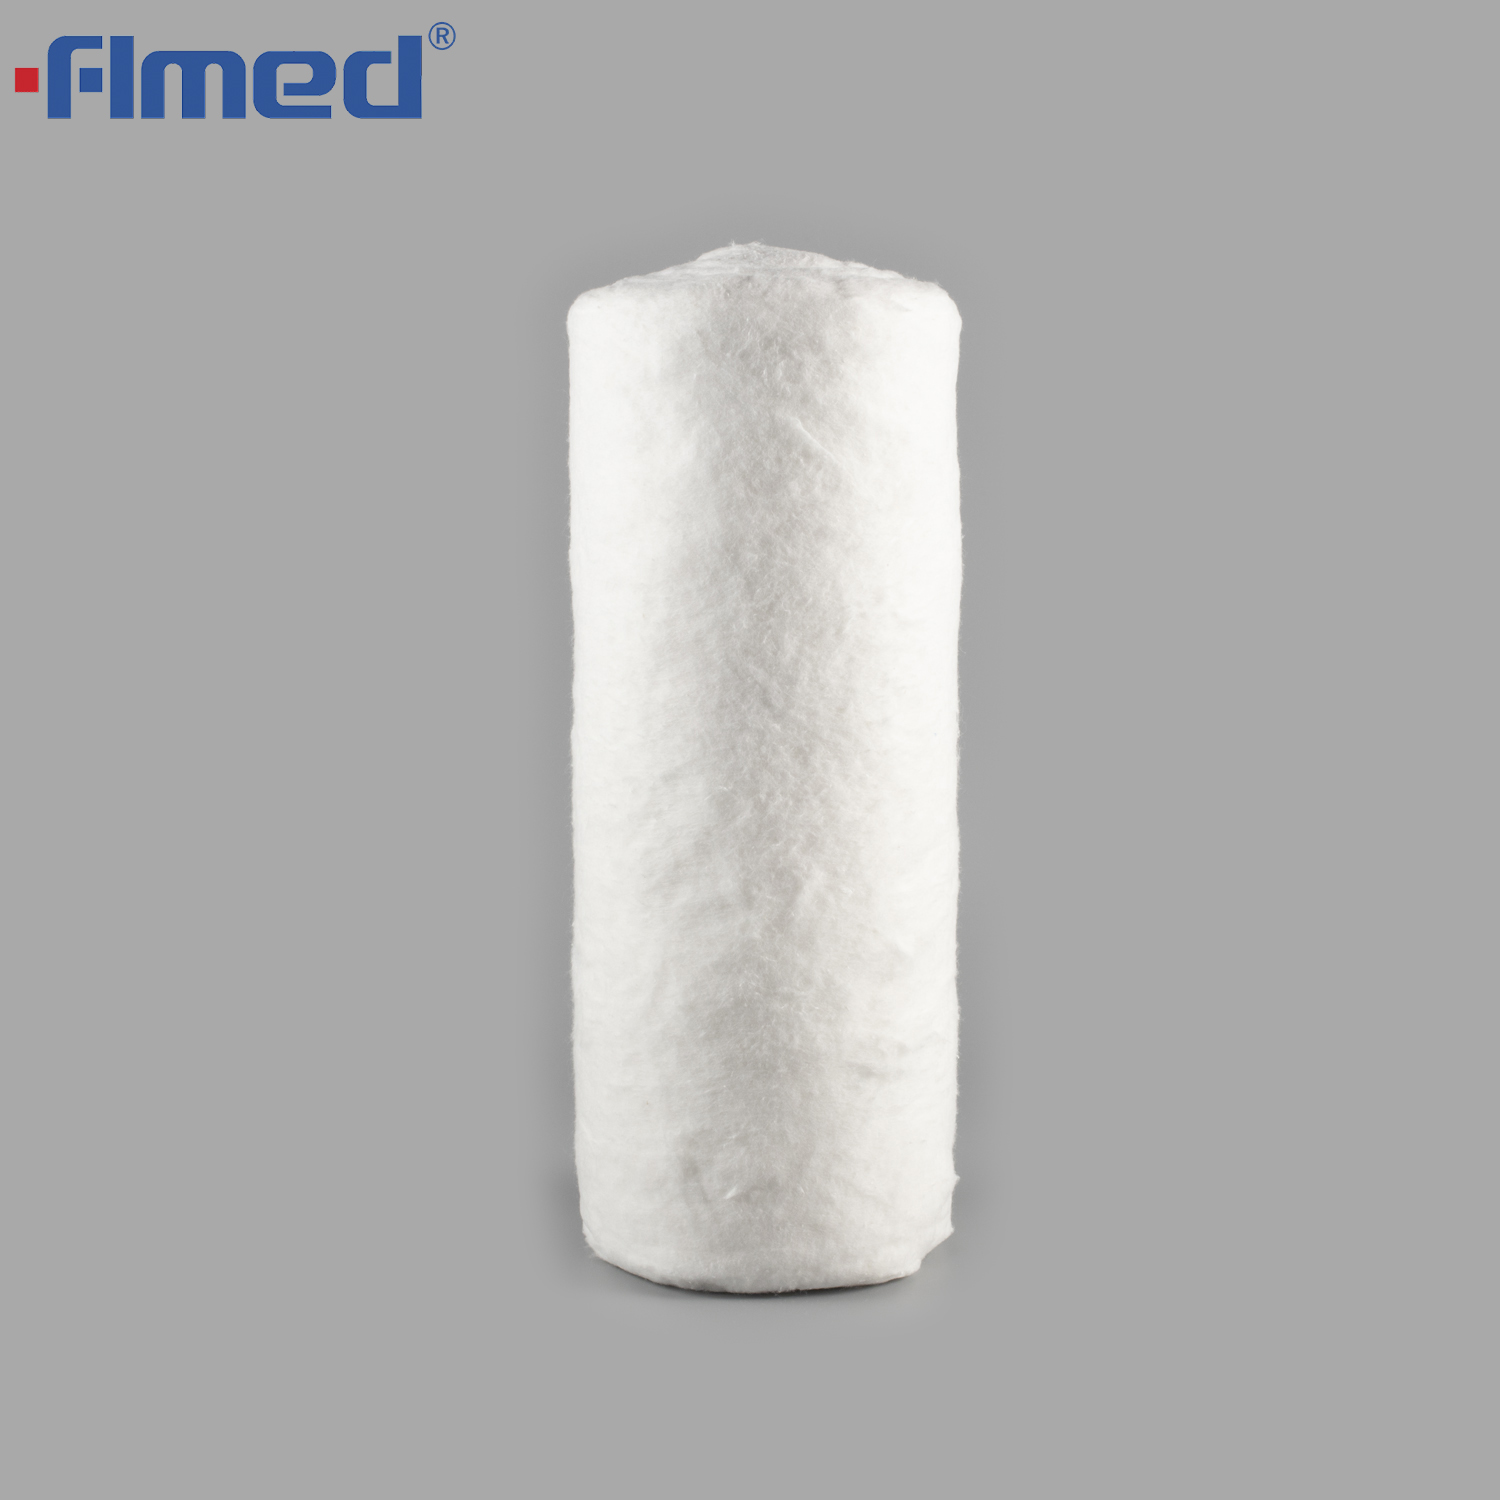 Absorbent cotton wool tightly rolled, 1 kg, 25 cm